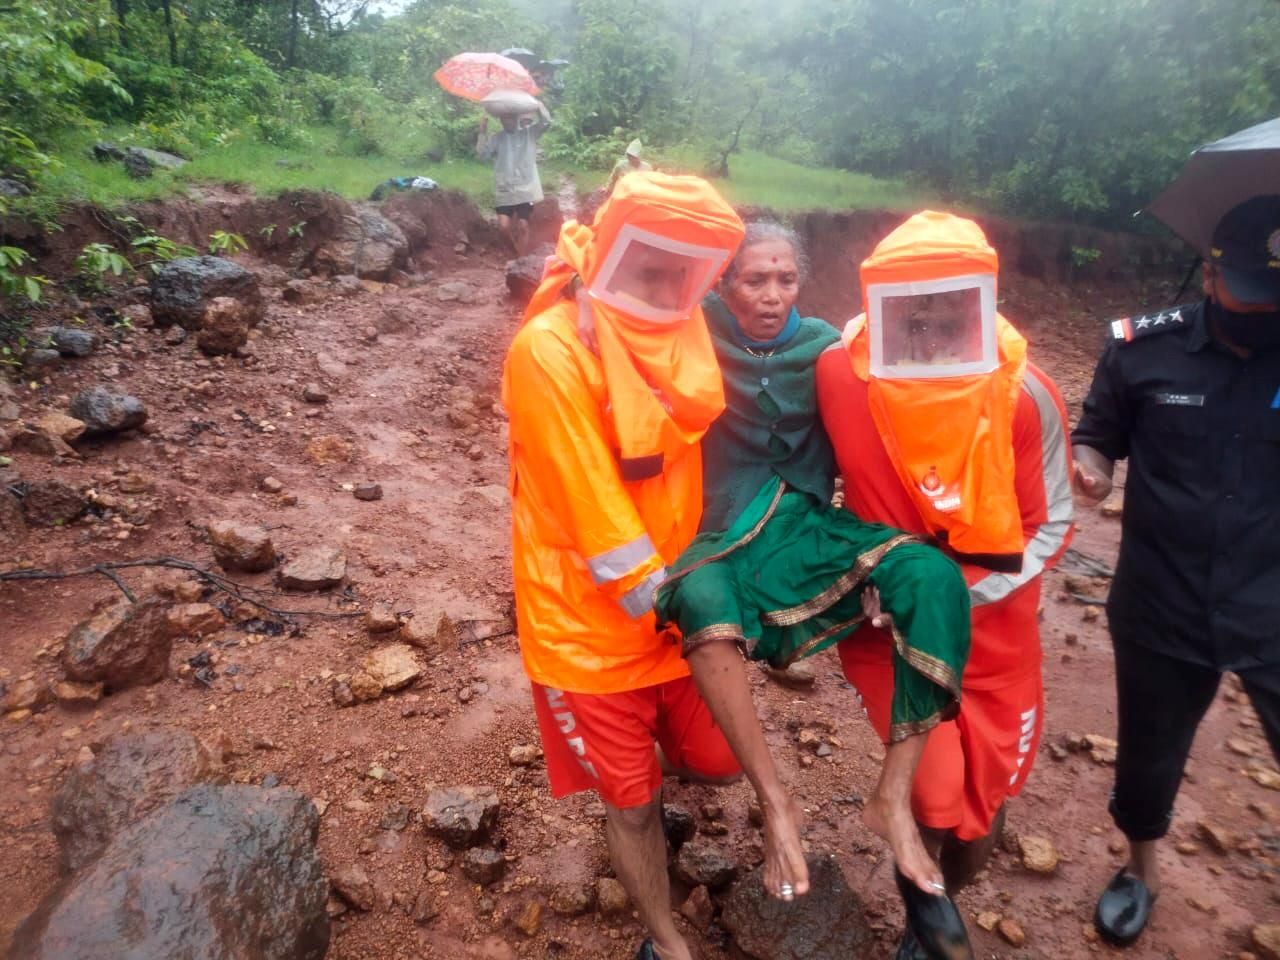 National Disaster Response Force personnel carry a woman in Chikhali village on July 23, 2021, during a rescue operation after heavy monsoon rains in India triggered deadly landslides in the western state of Maharashtra. (Photo: National Disaster Response Force/Handout/Anadolu Agency via Getty Images)